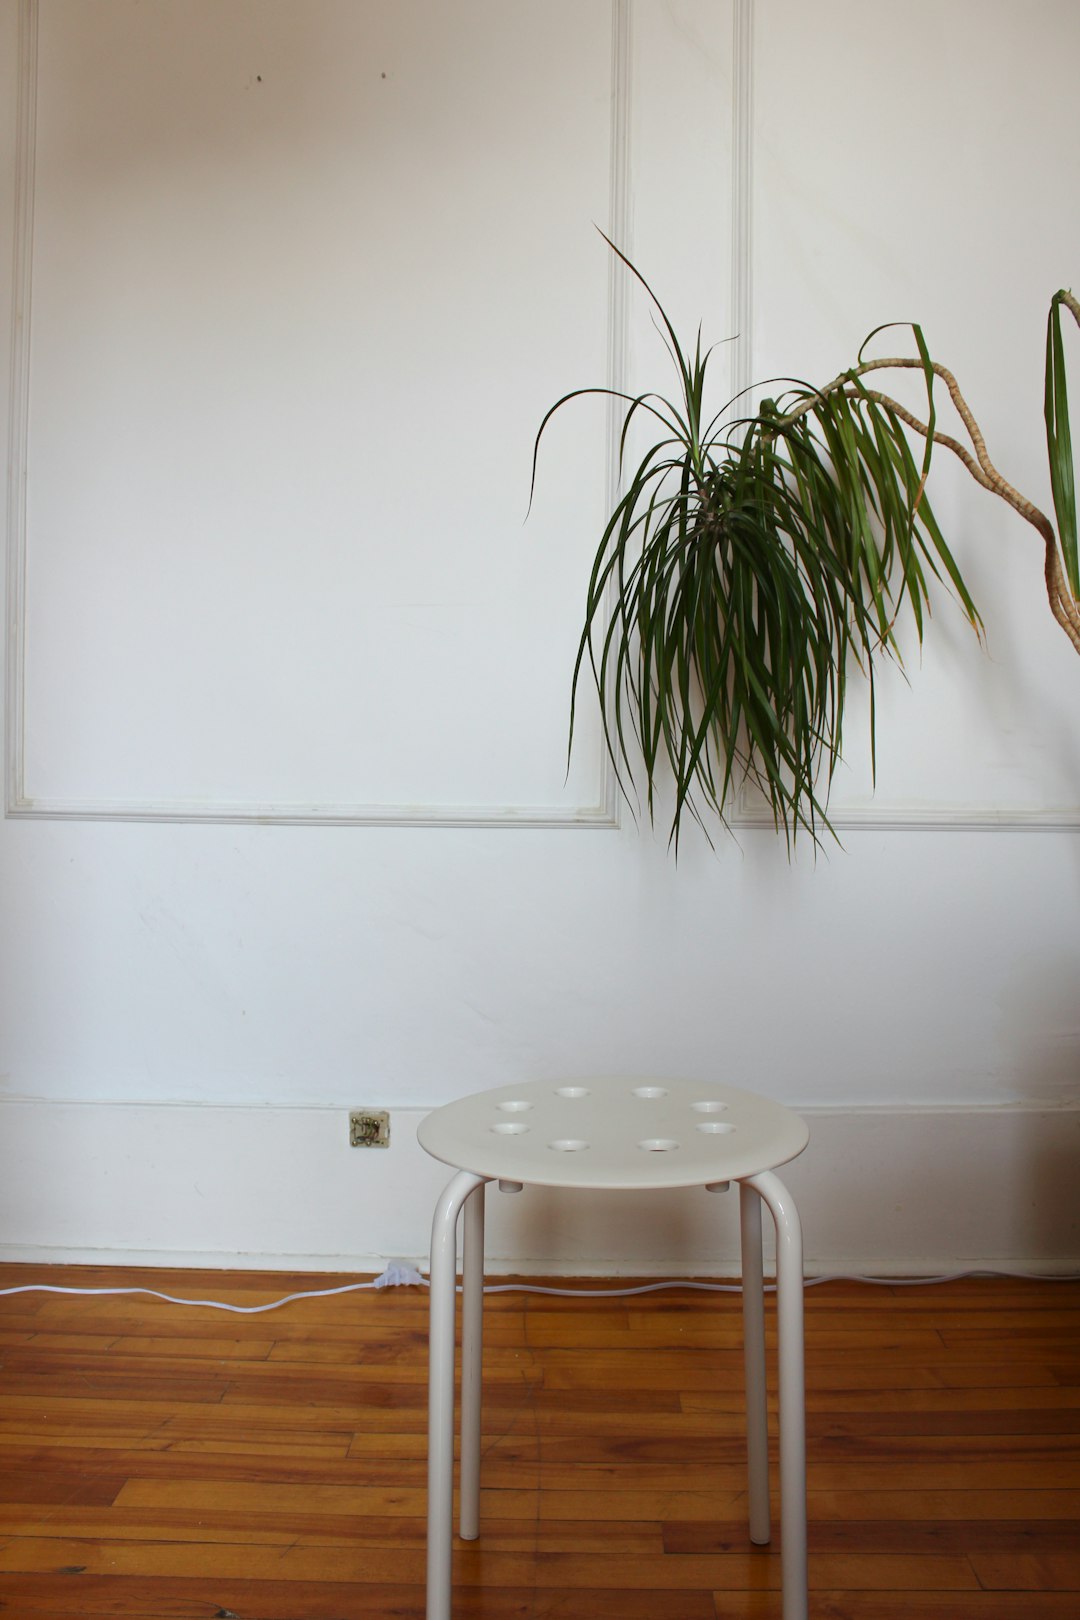 House plant against a wall with a stool and mirror